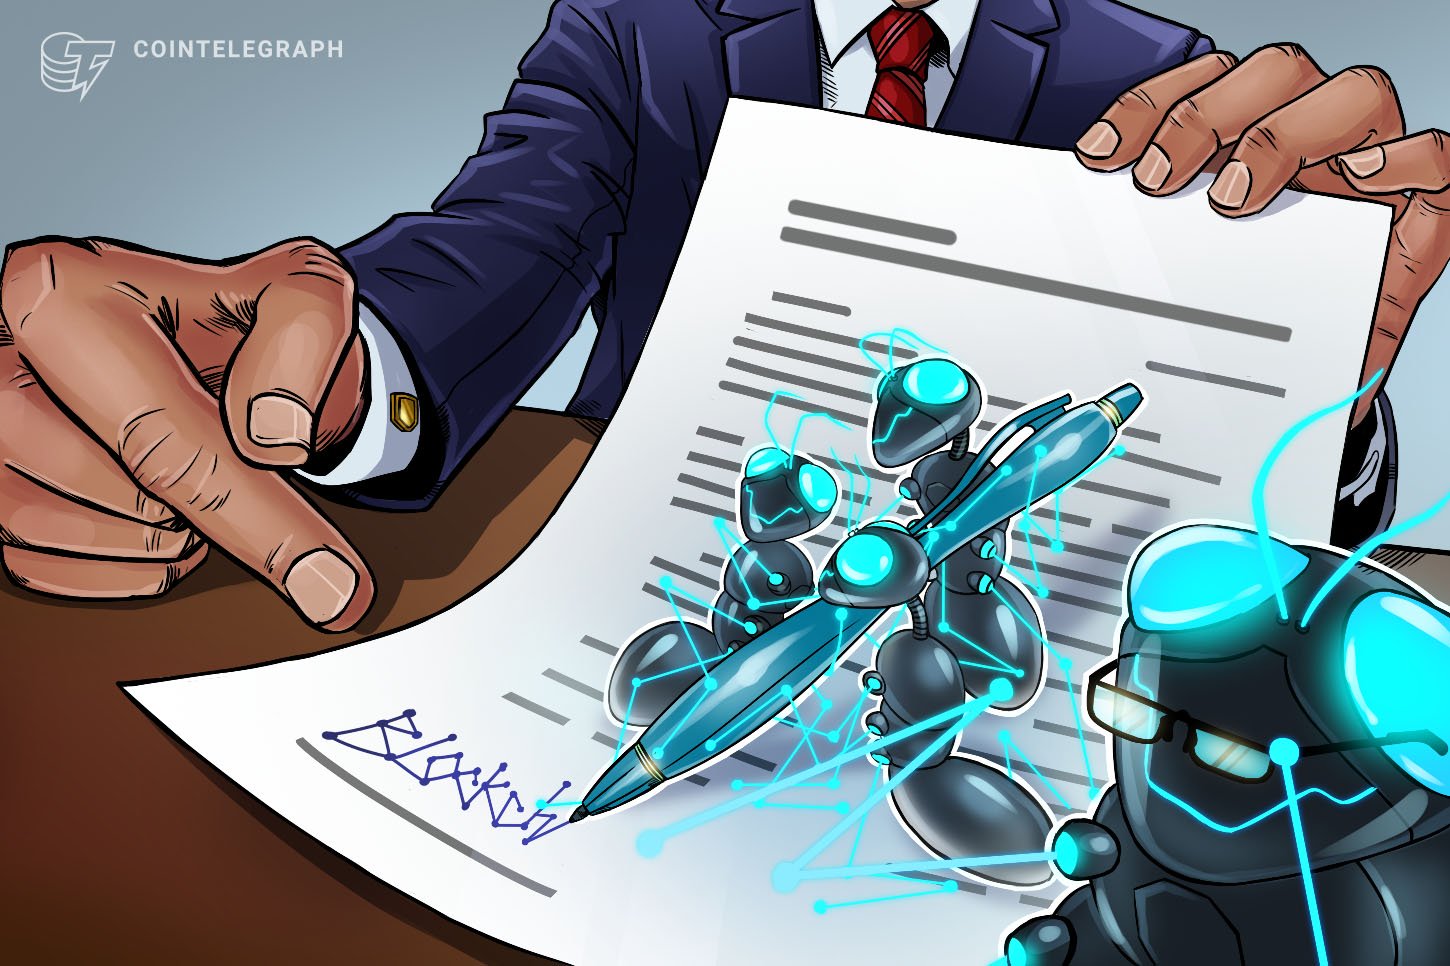 250M Items of Digital Content material to Be Copyrighted on Ontology Blockchain